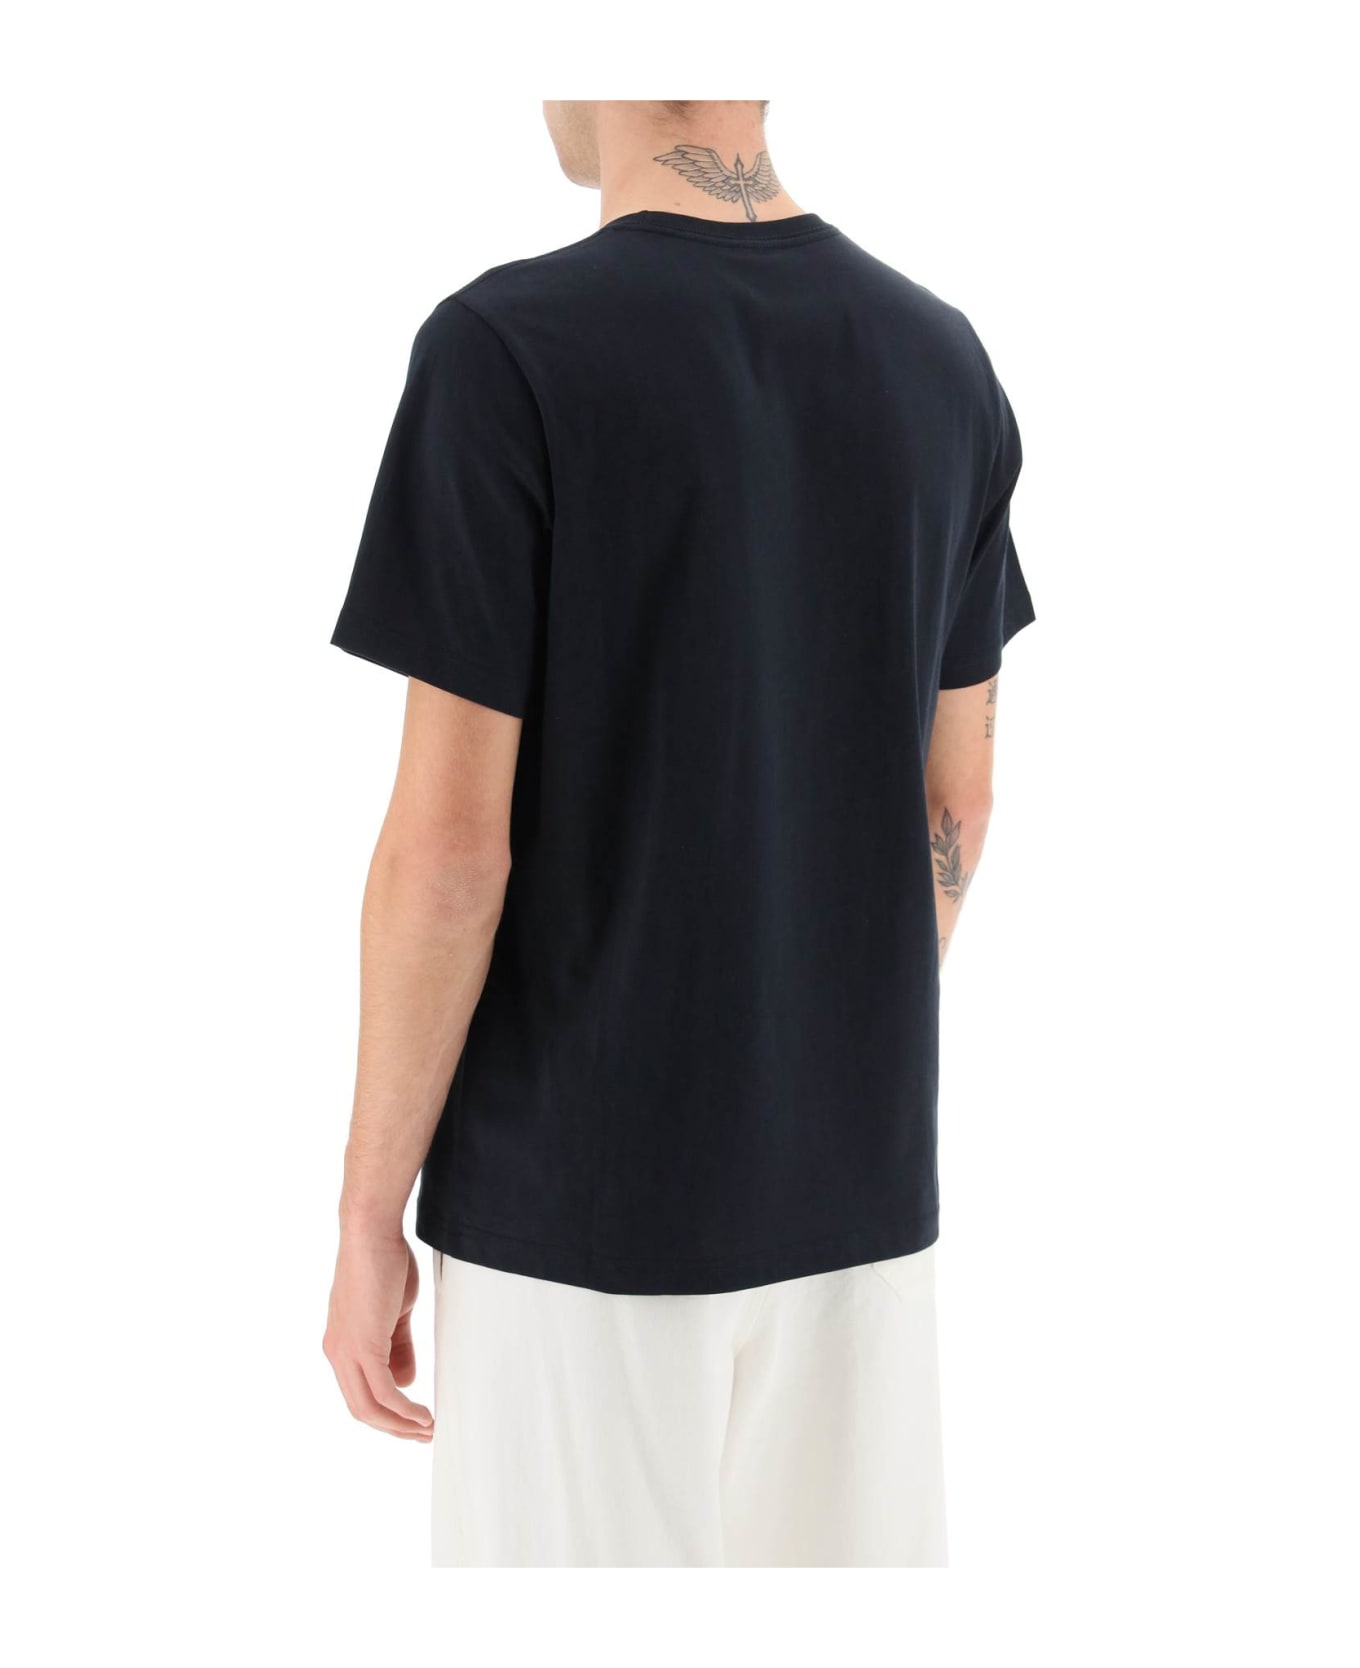 PS by Paul Smith Organic Cotton T-shirt - Blue シャツ